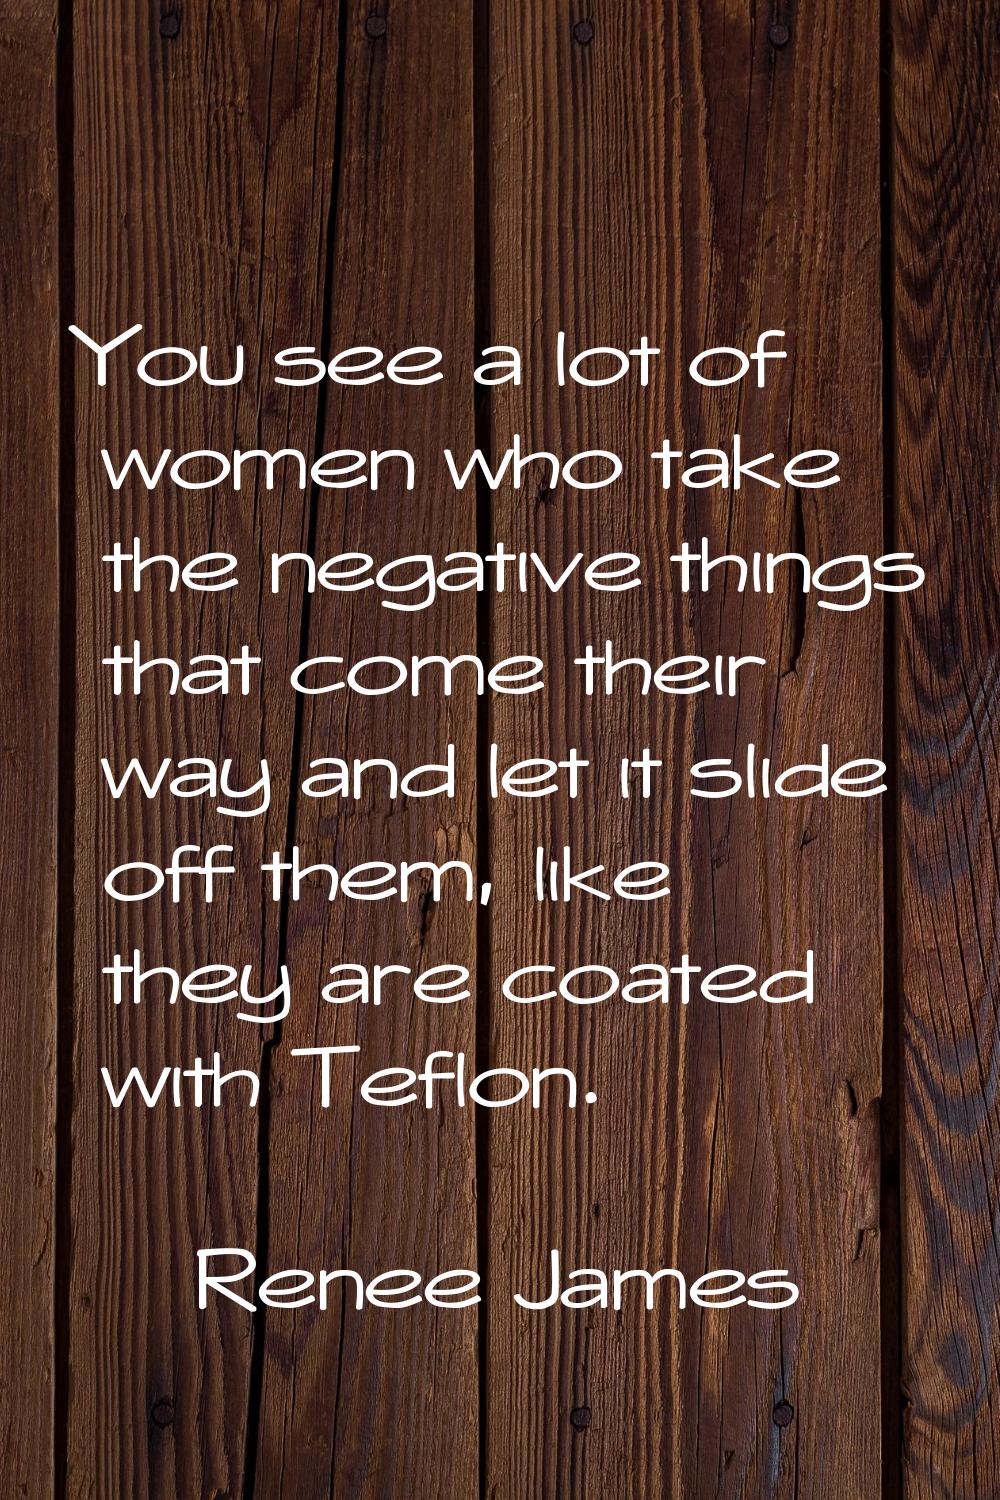 You see a lot of women who take the negative things that come their way and let it slide off them, 